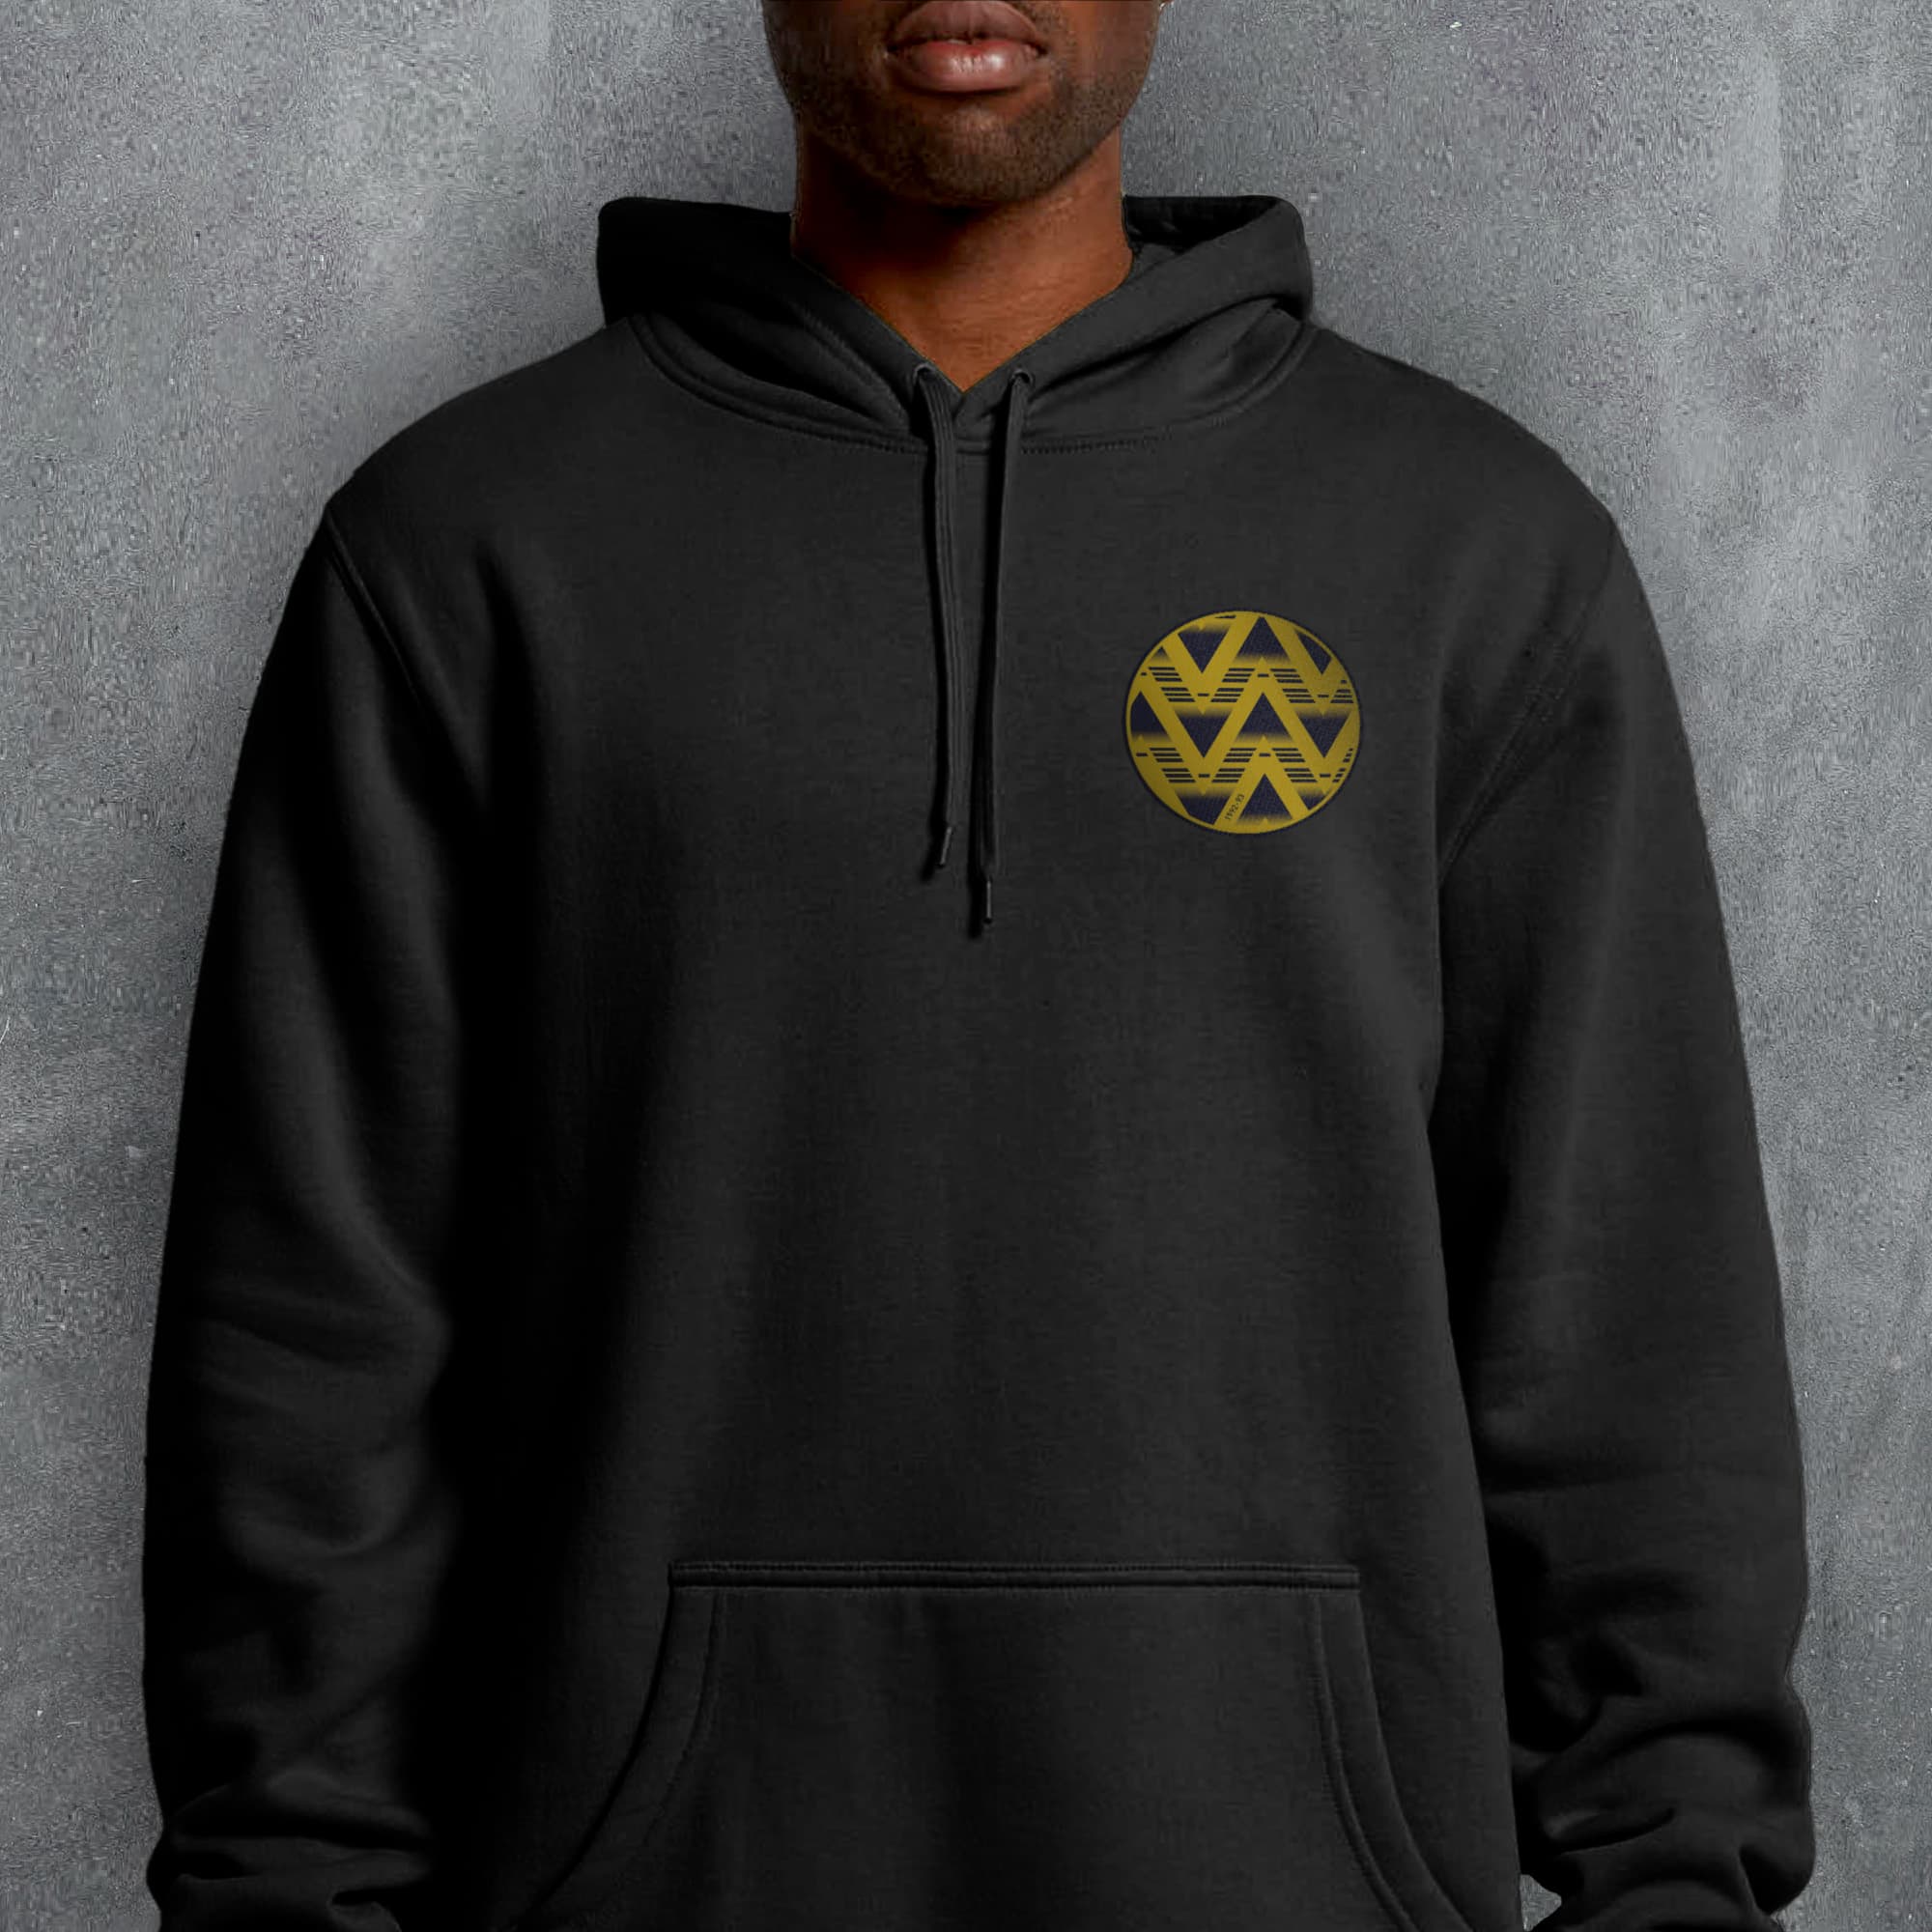 a man wearing a black hoodie with a gold logo